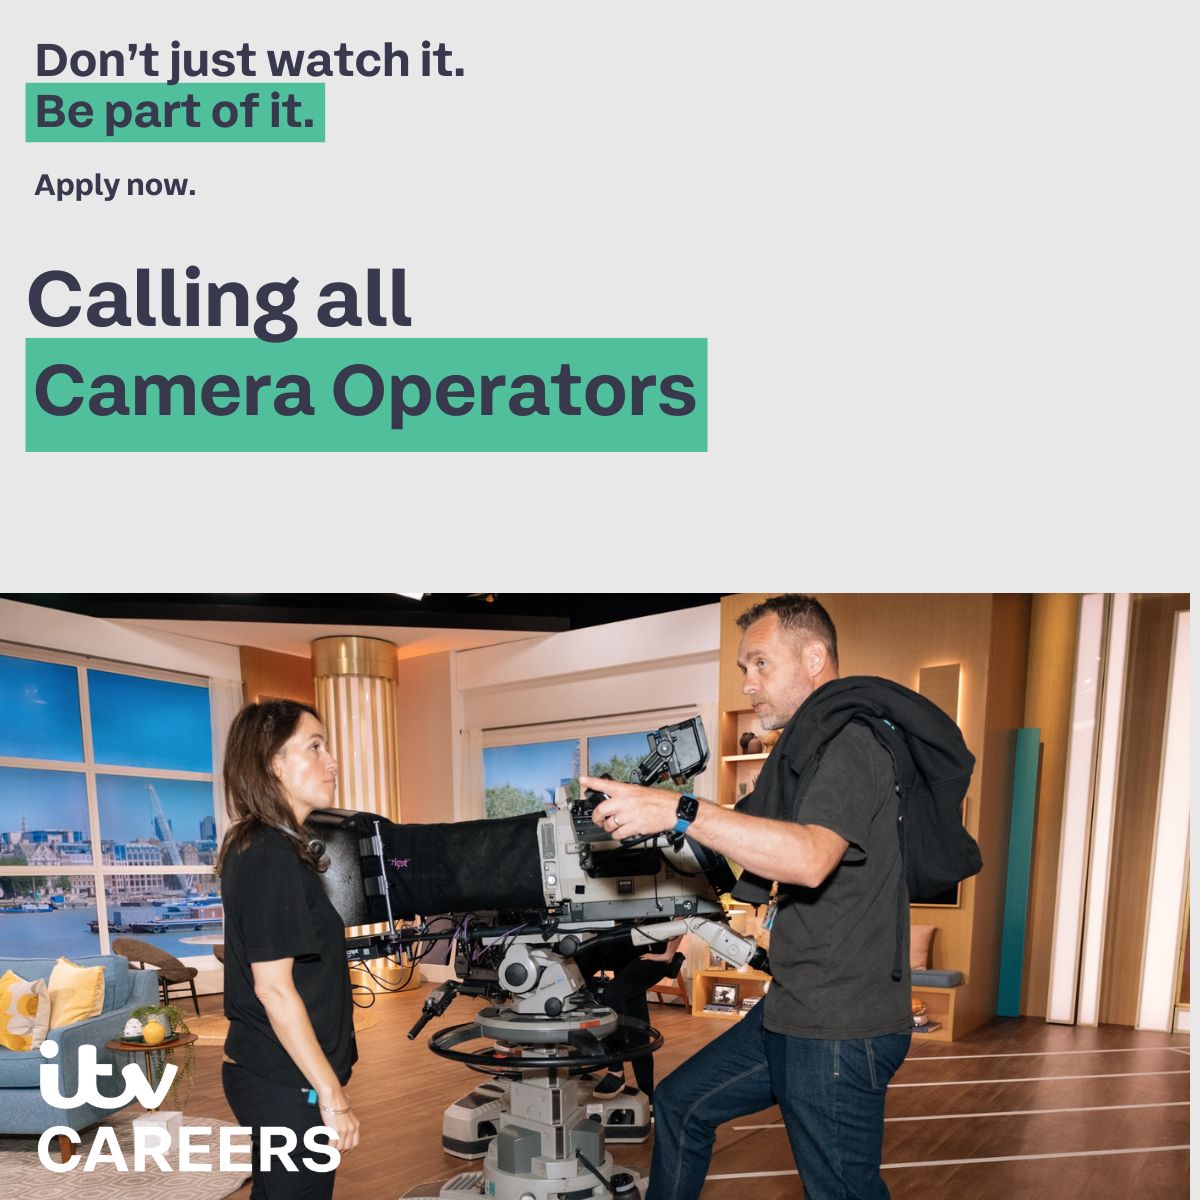 We are looking for an experienced Camera Operator to join the award winning news team at ITV Granada Reports based in Salford.

Apply here - lnkd.in/eNvrefmj

Closing date: Sunday 28th April

#TVProduction #ITVCareers